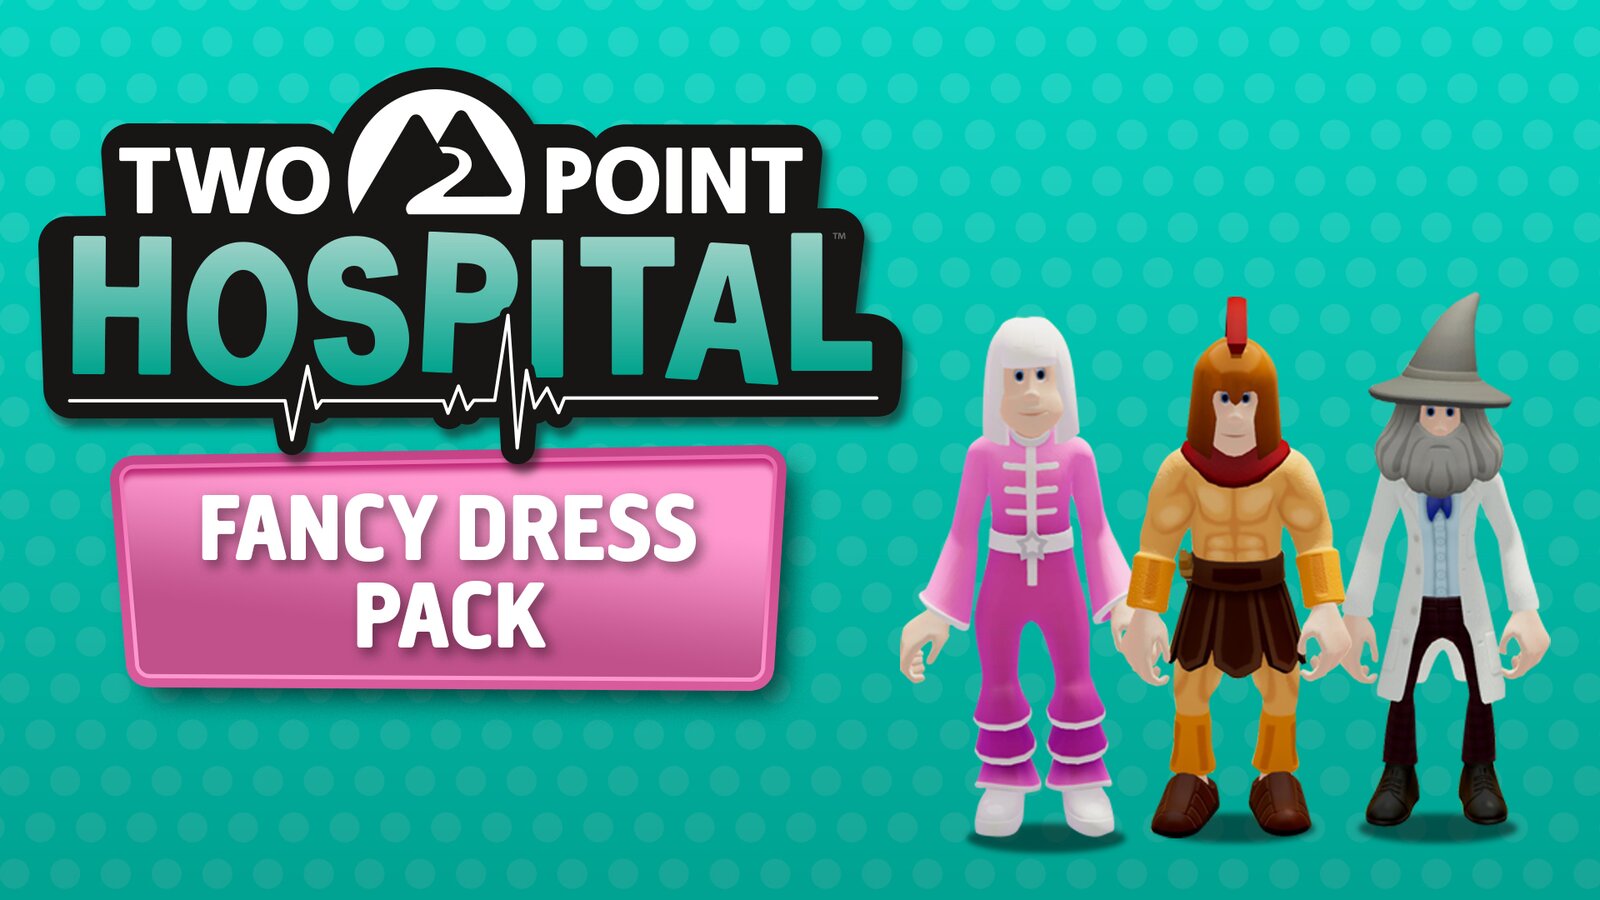 Two Point Hospital - The Fancy Dress Pack